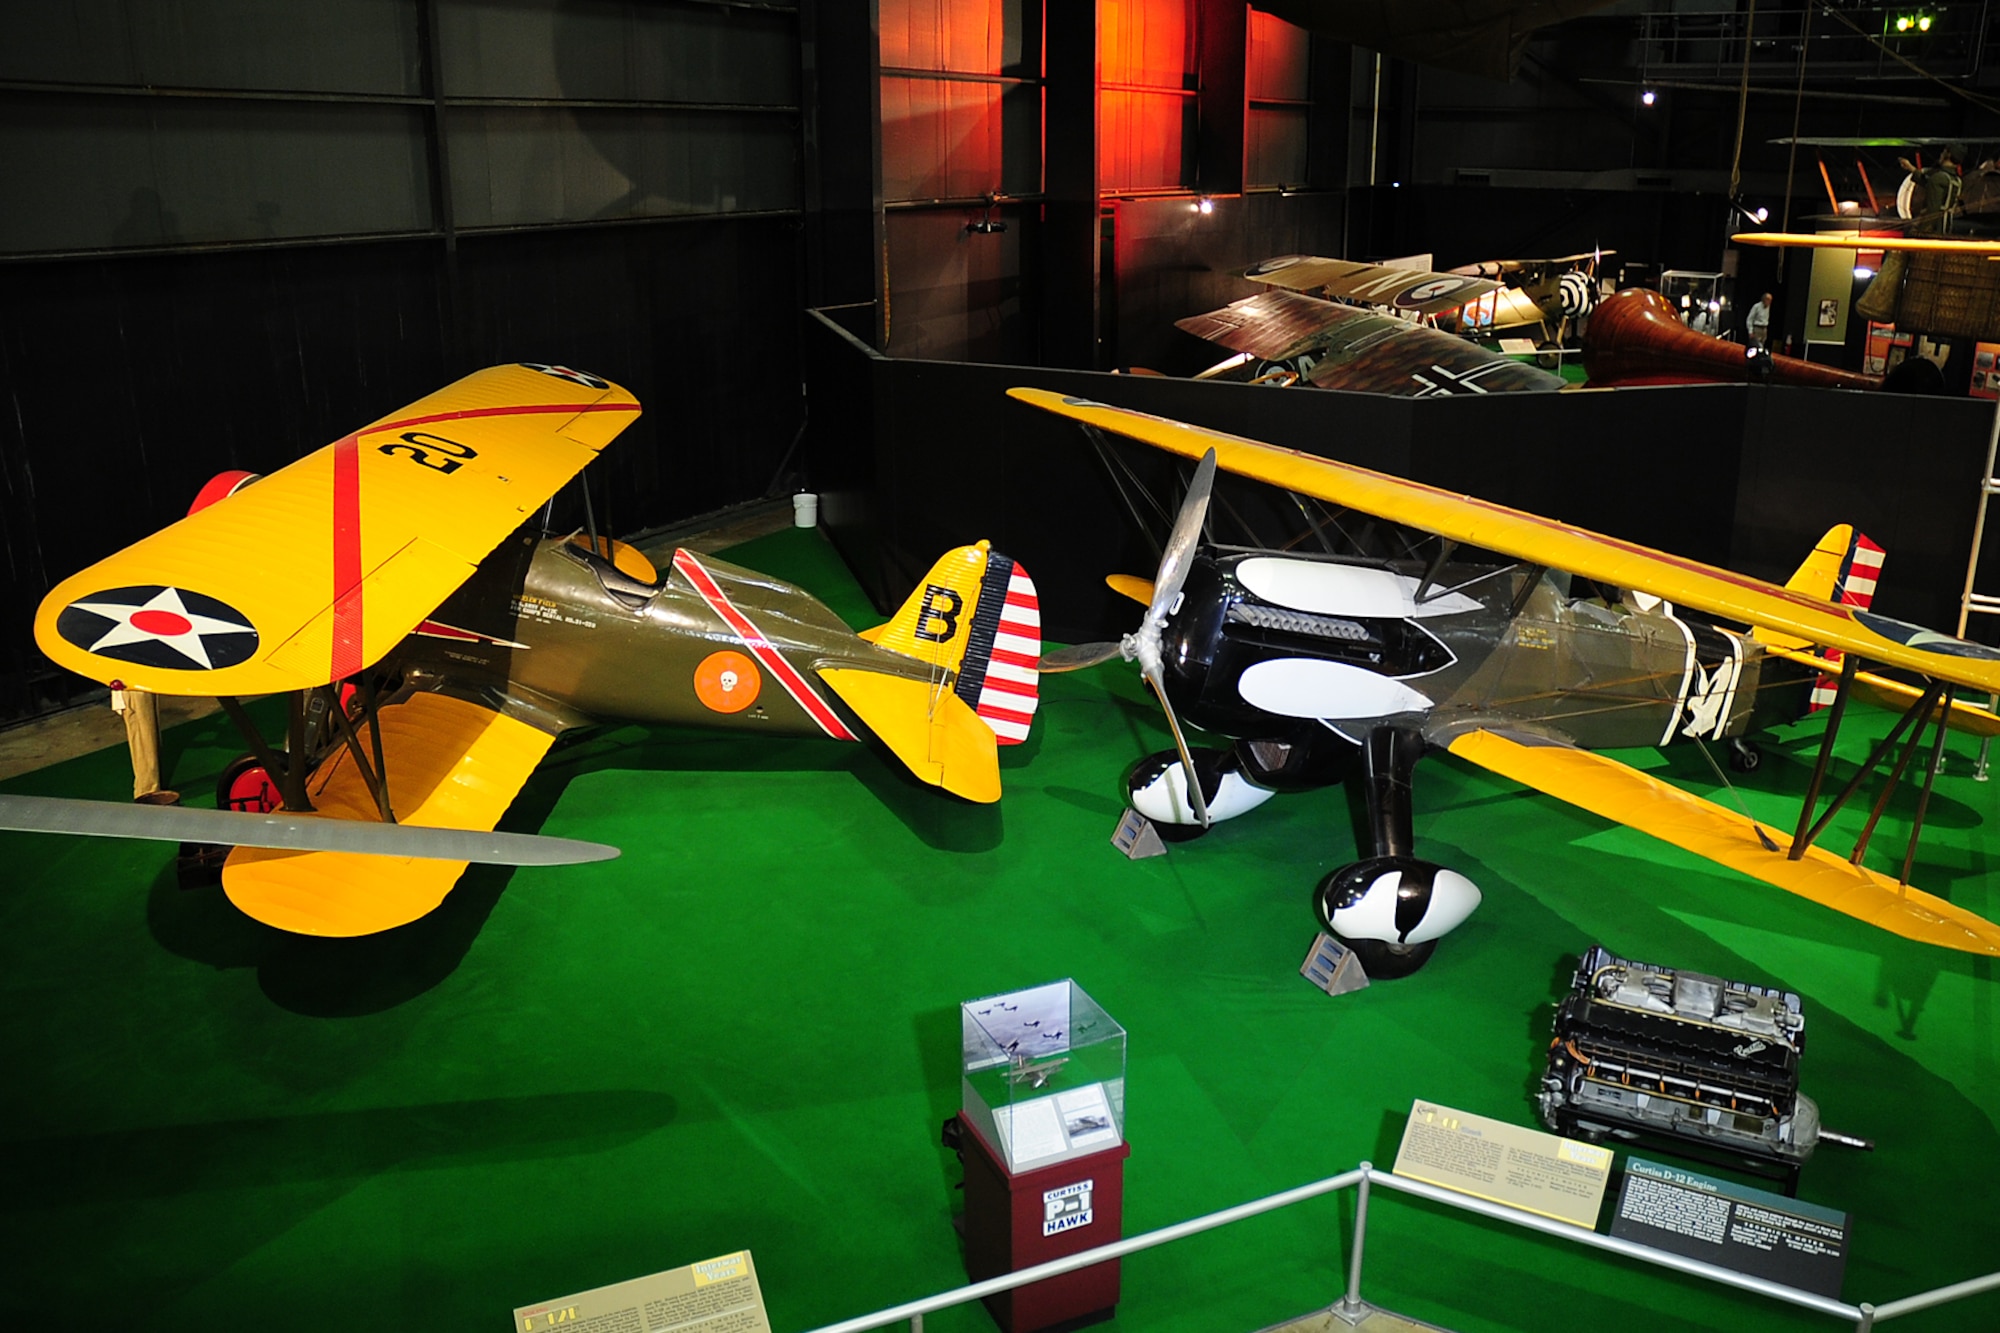 DAYTON, Ohio -- Boeing P-12E(left) and the Curtiss P-6E Hawk(right) in the Early Years Gallery at the National Museum of the United States Air Force. (U.S. Air Force photo)